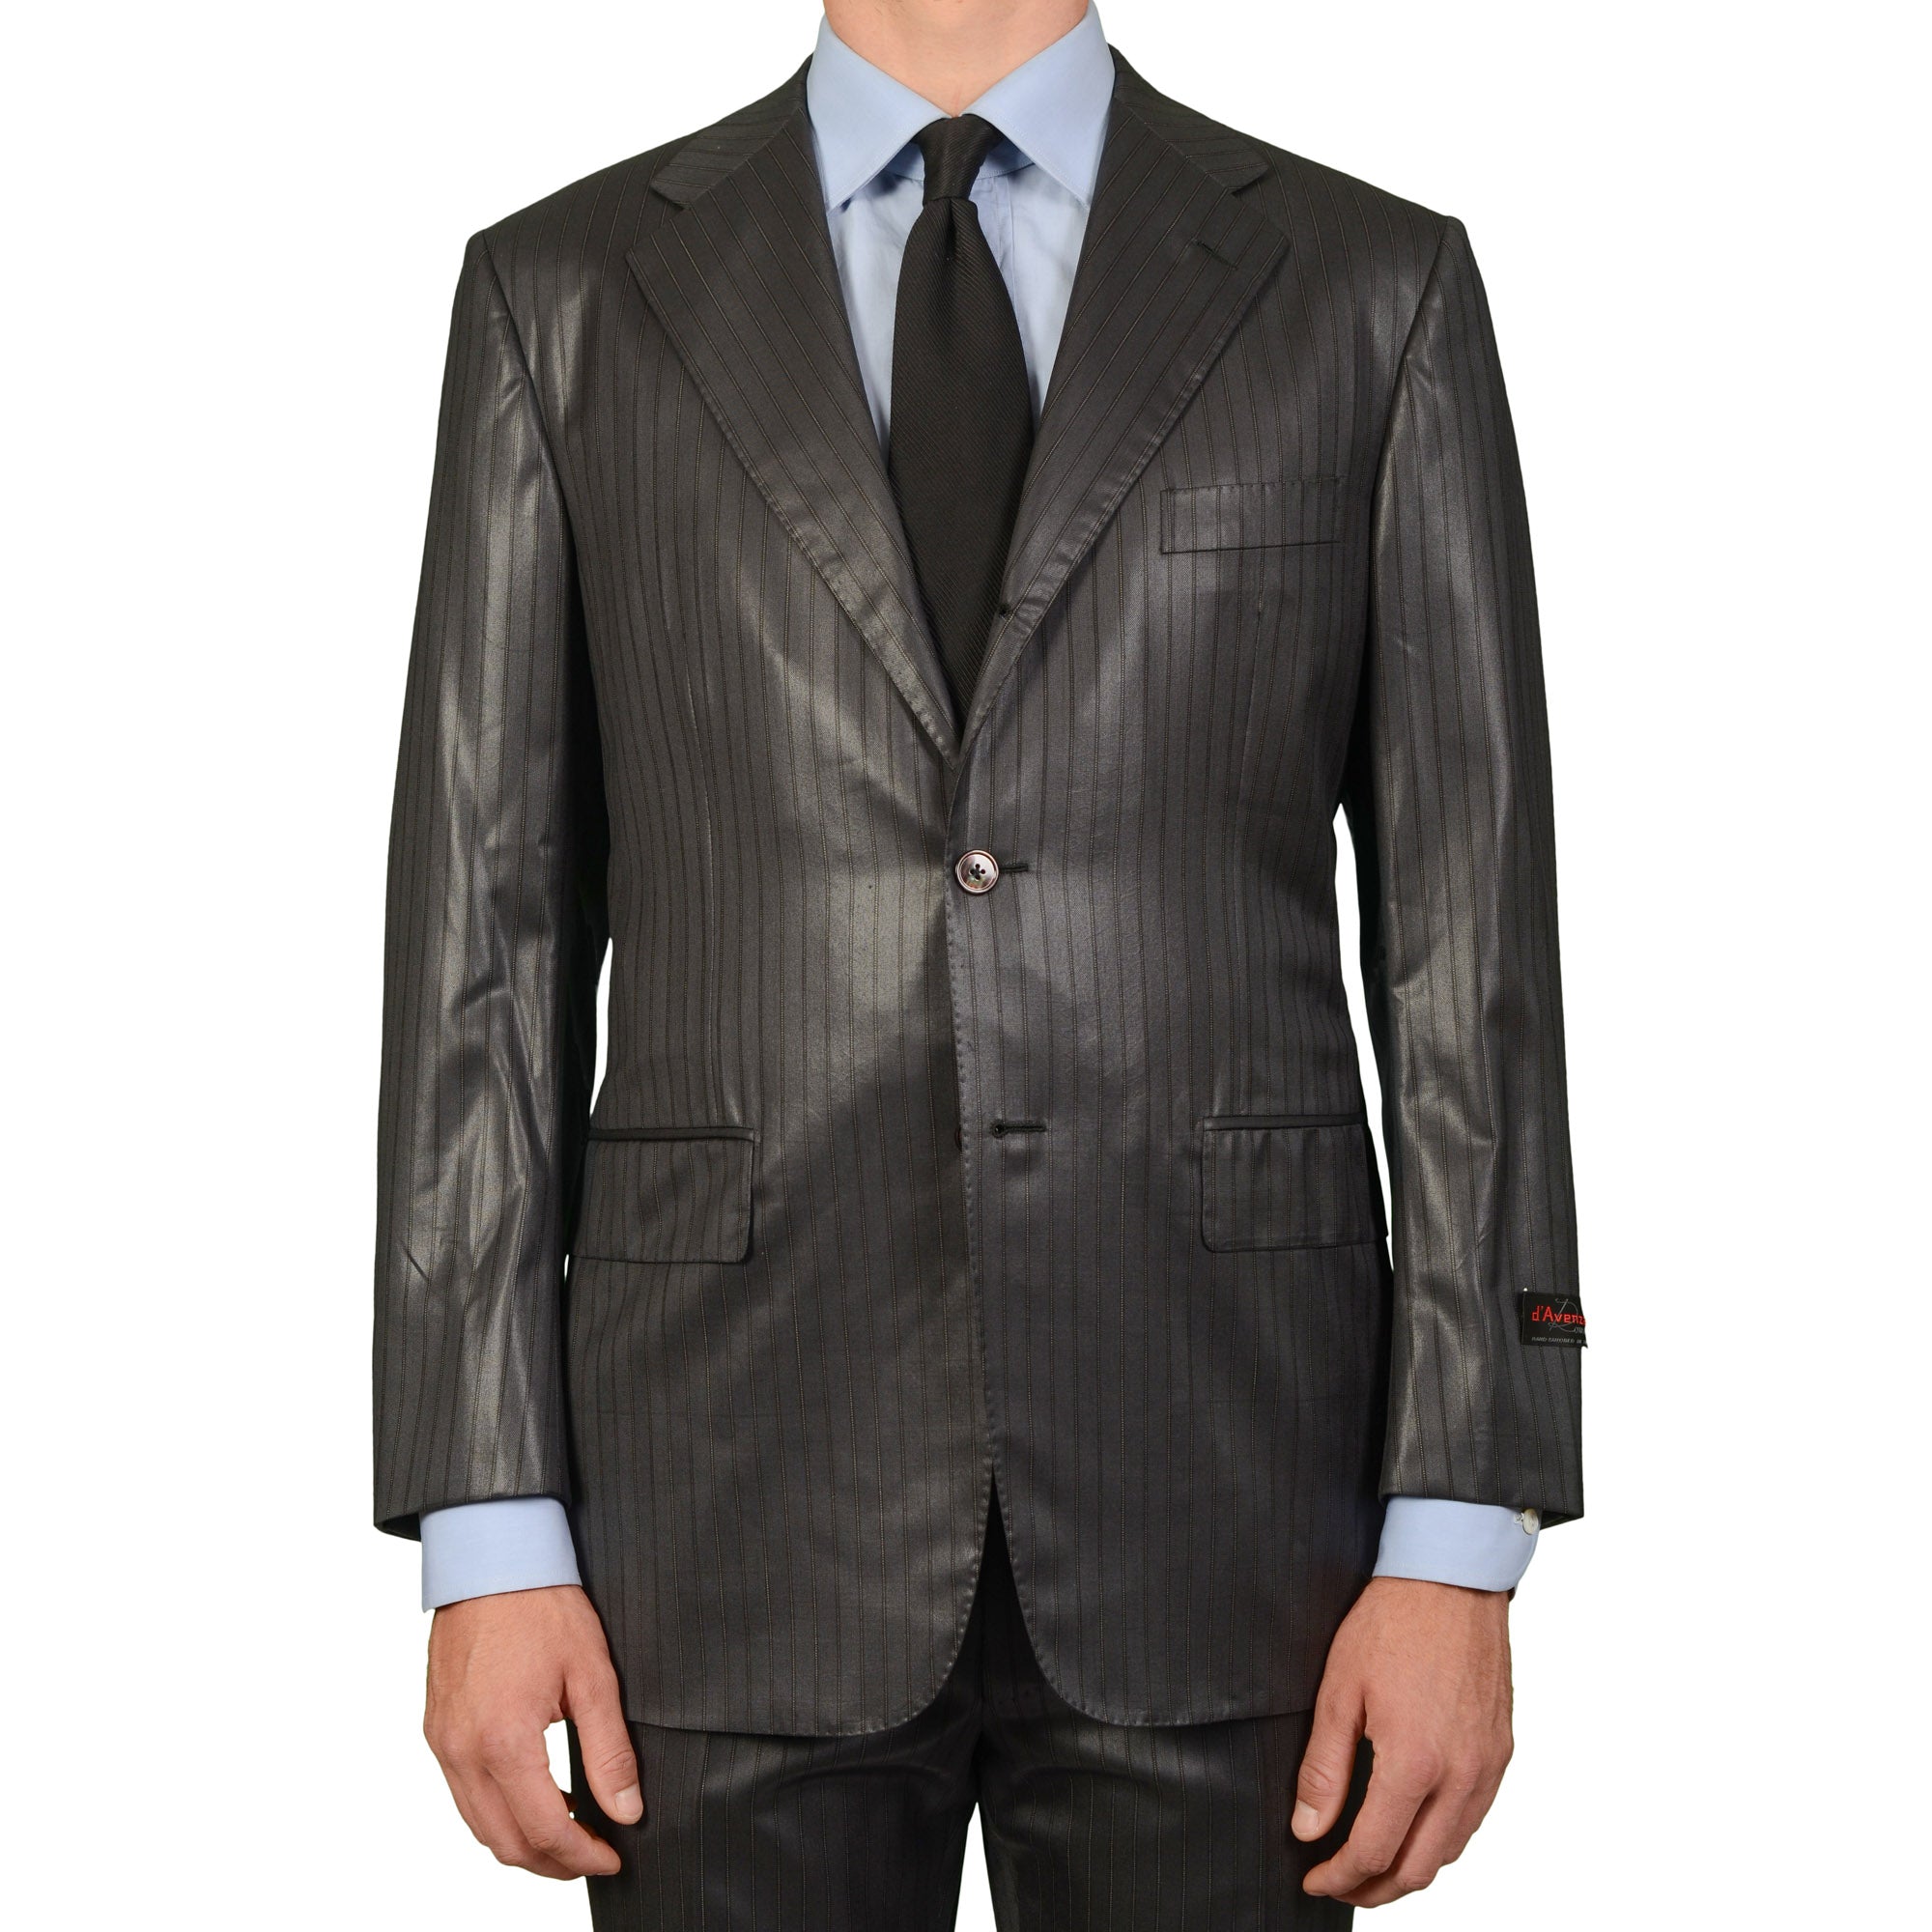 D'AVENZA Roma For MIOZZI Handmade Gray Striped Wool Suit EU 50 NEW US 40 D'AVENZA